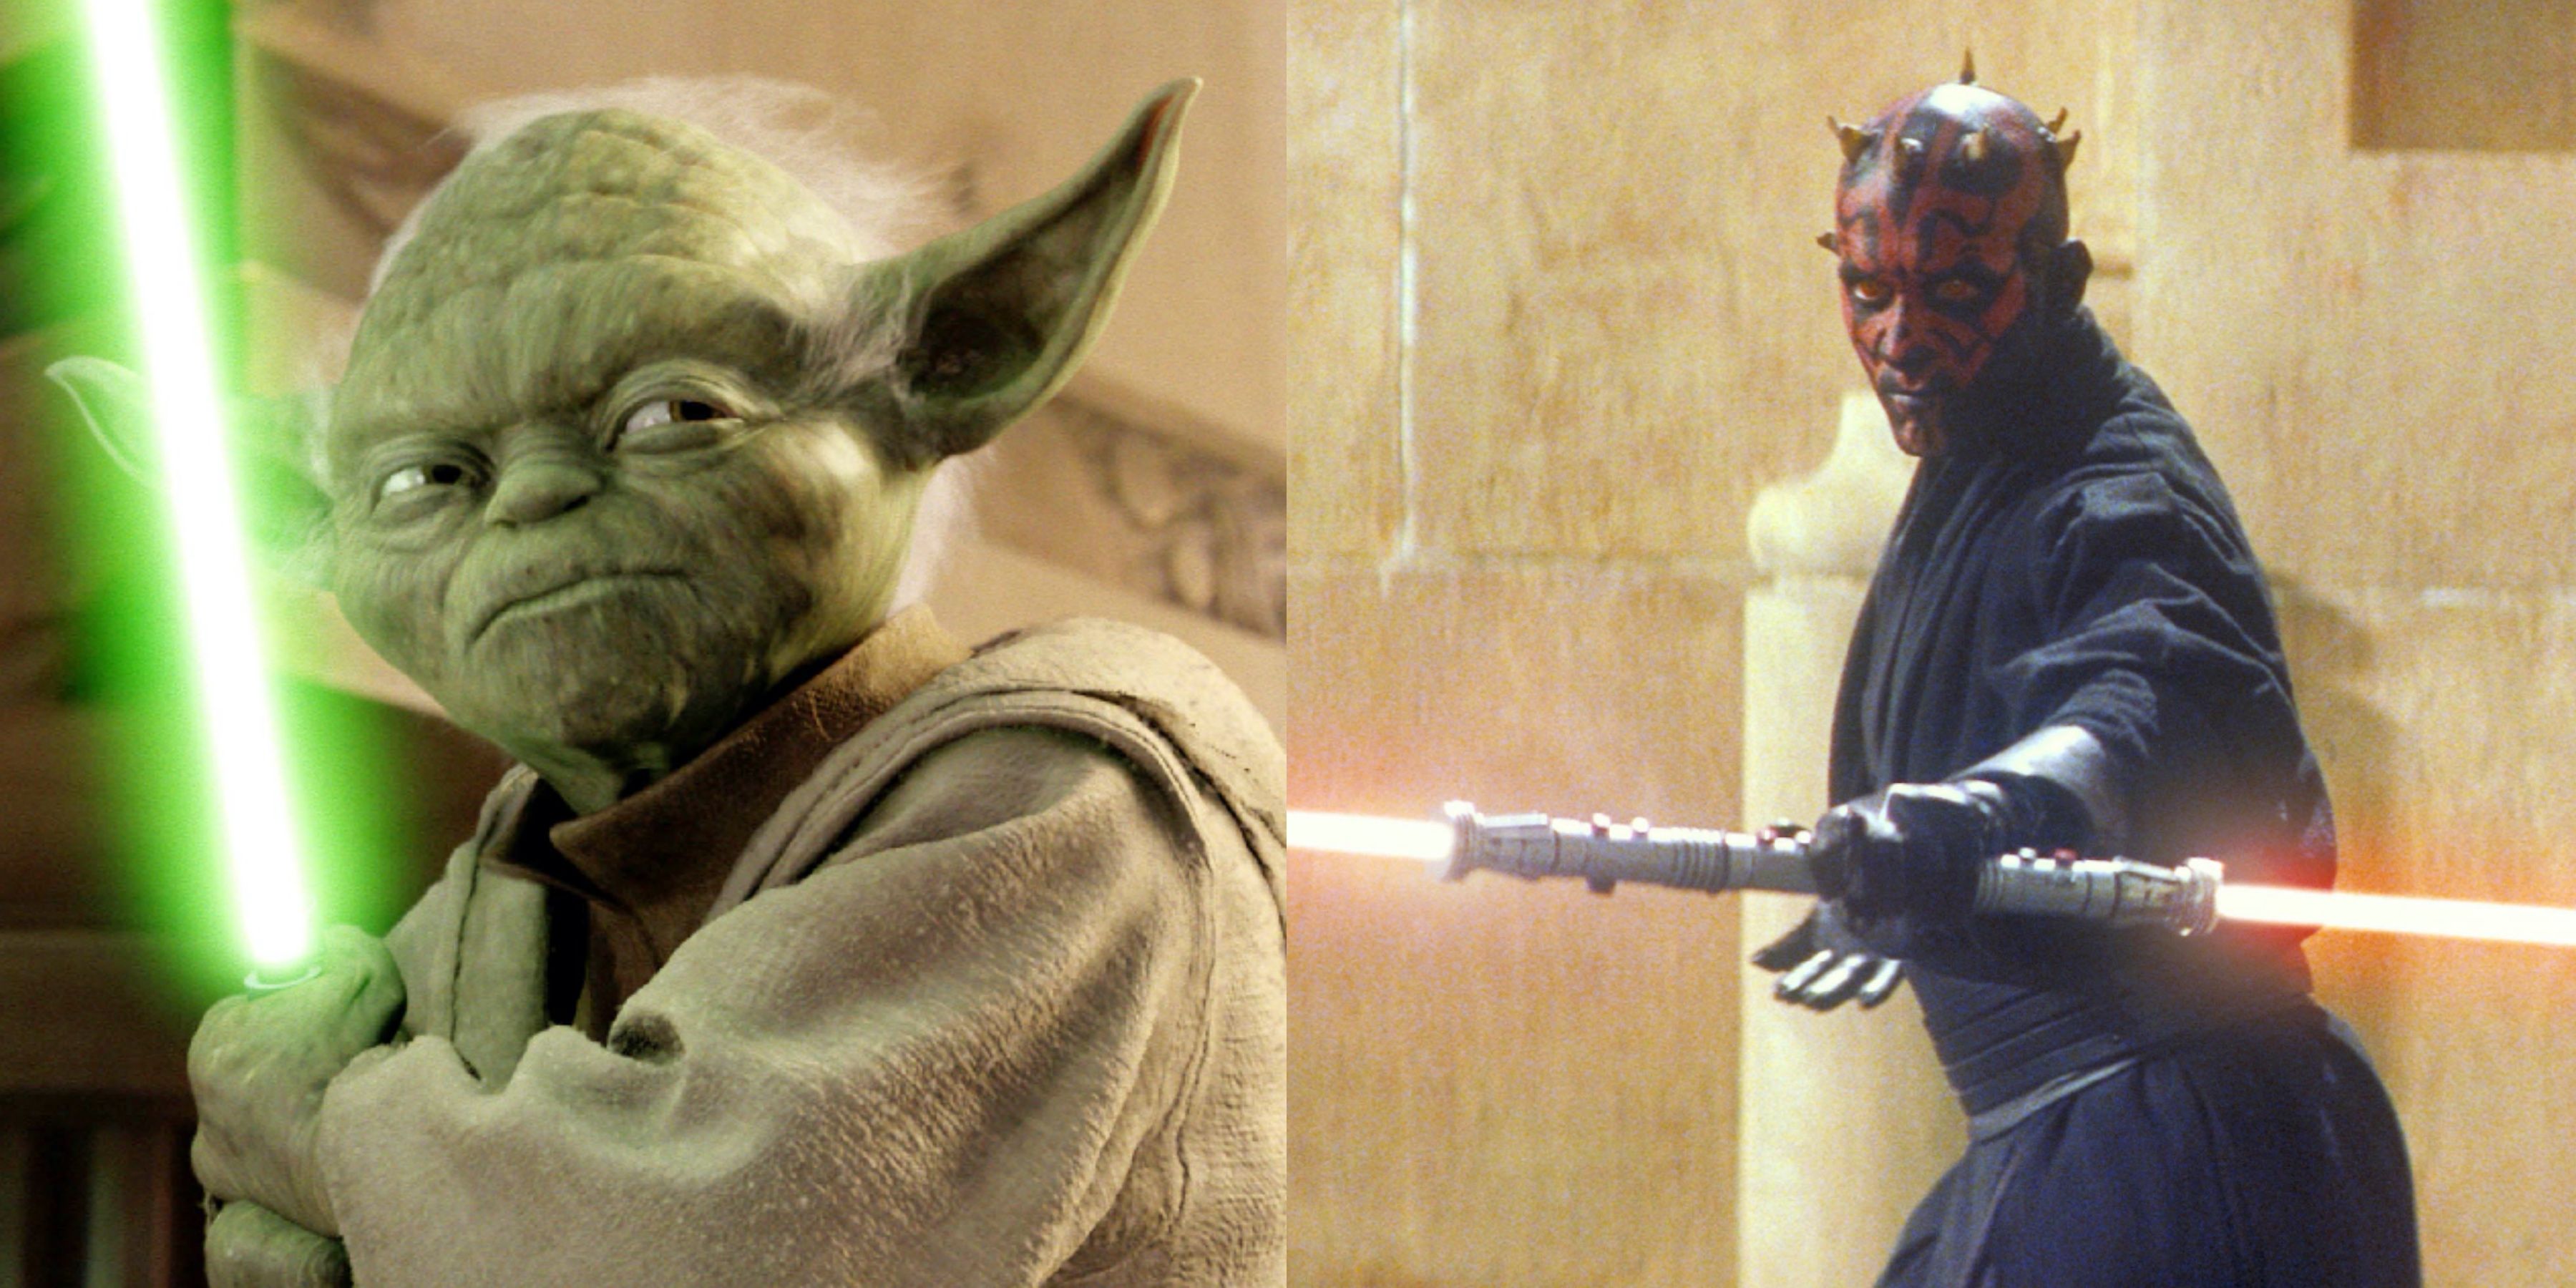 Upcoming New Star Wars Movies: What's Next in the Franchise